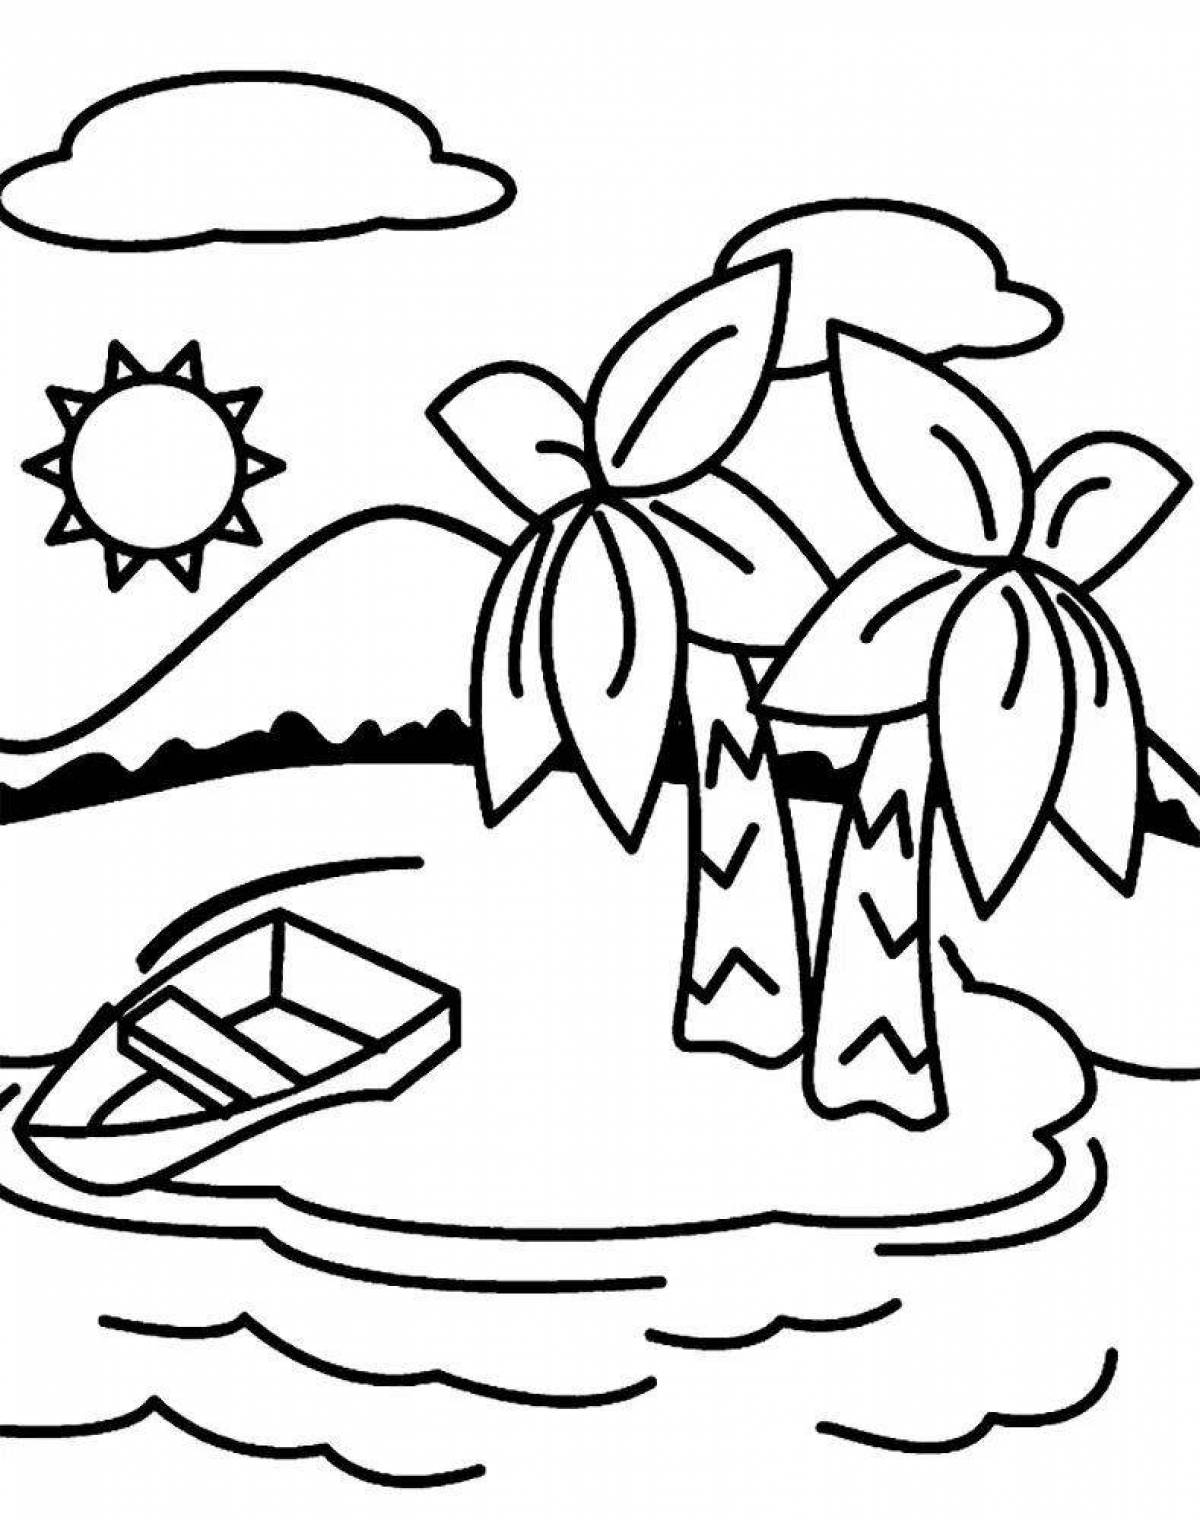 Tropical desert island coloring page